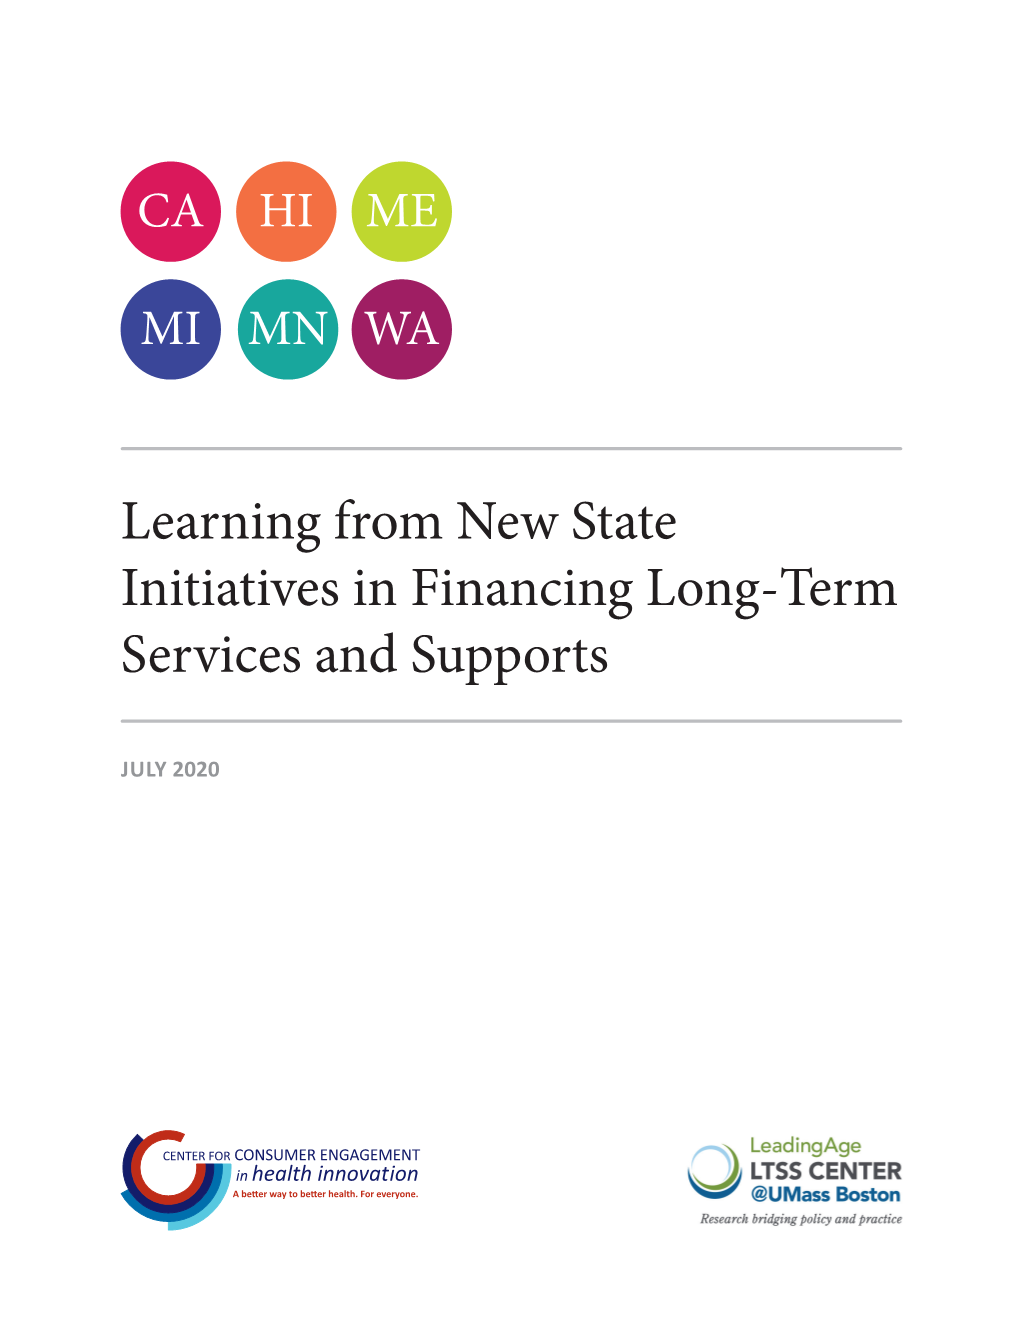 Learning from New State Initiatives in Financing Long-Term Services and Supports